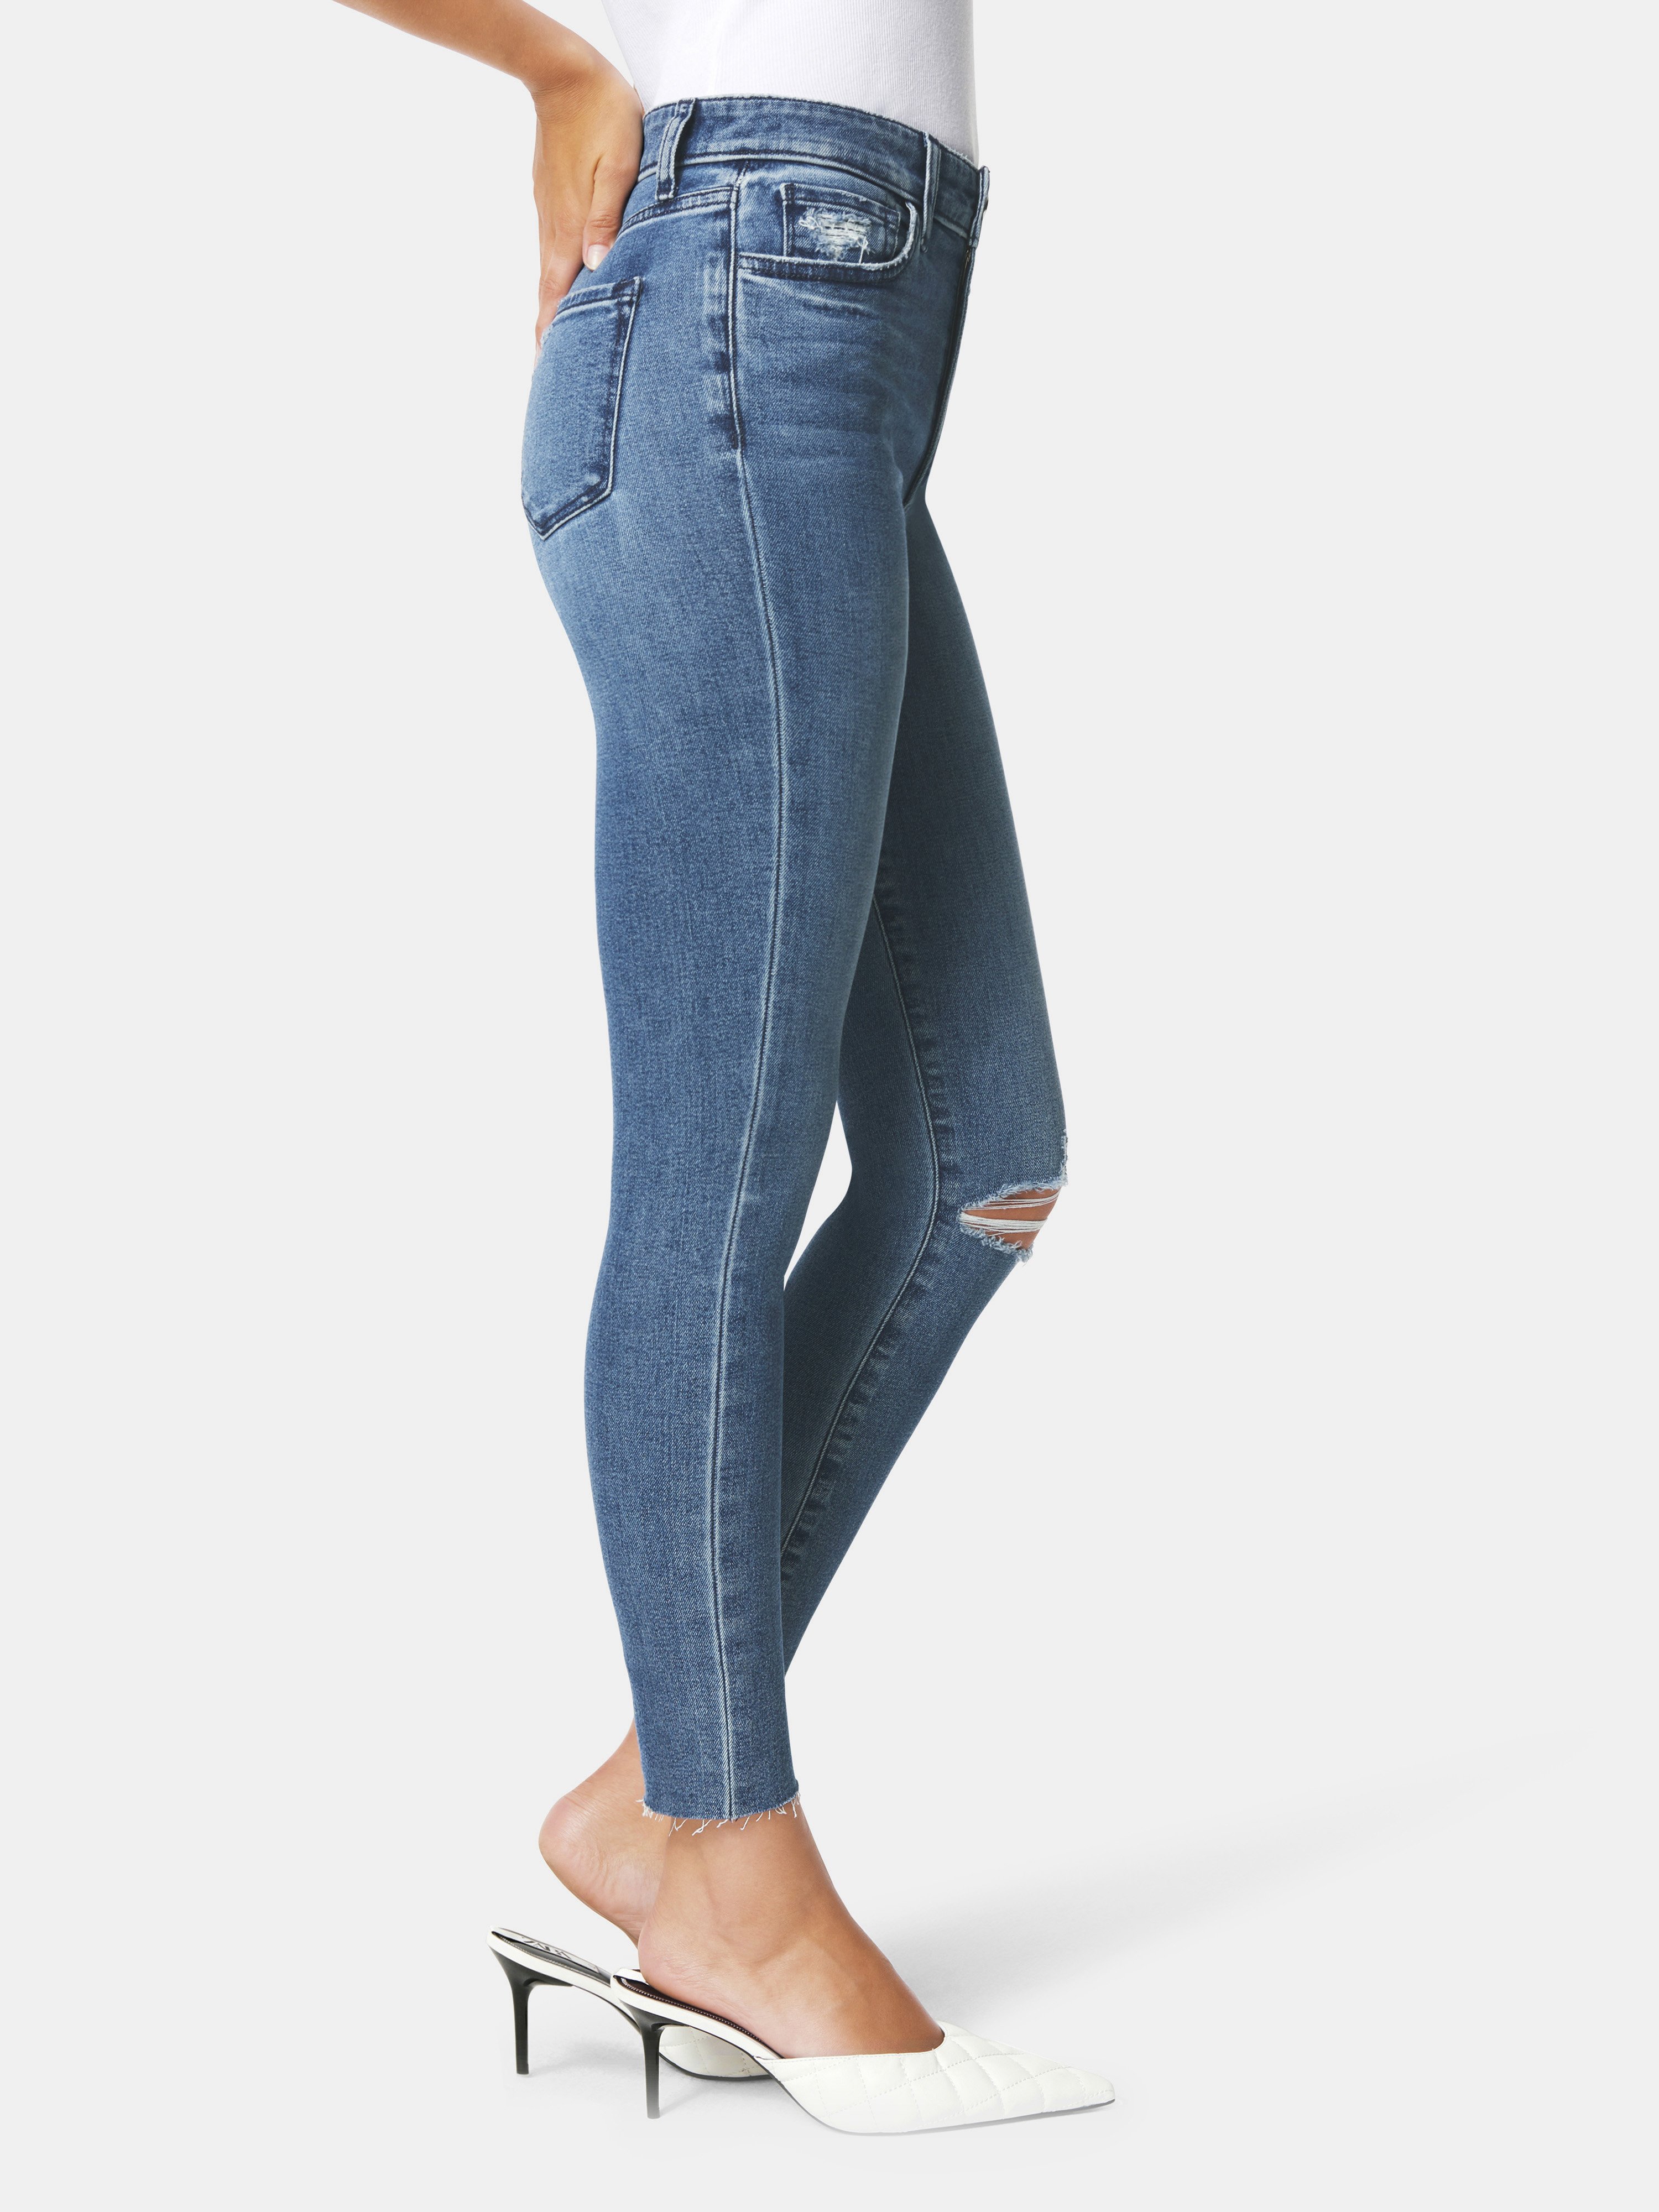 Joes Jeans Womens Charlie High Rise Skinny Ankle